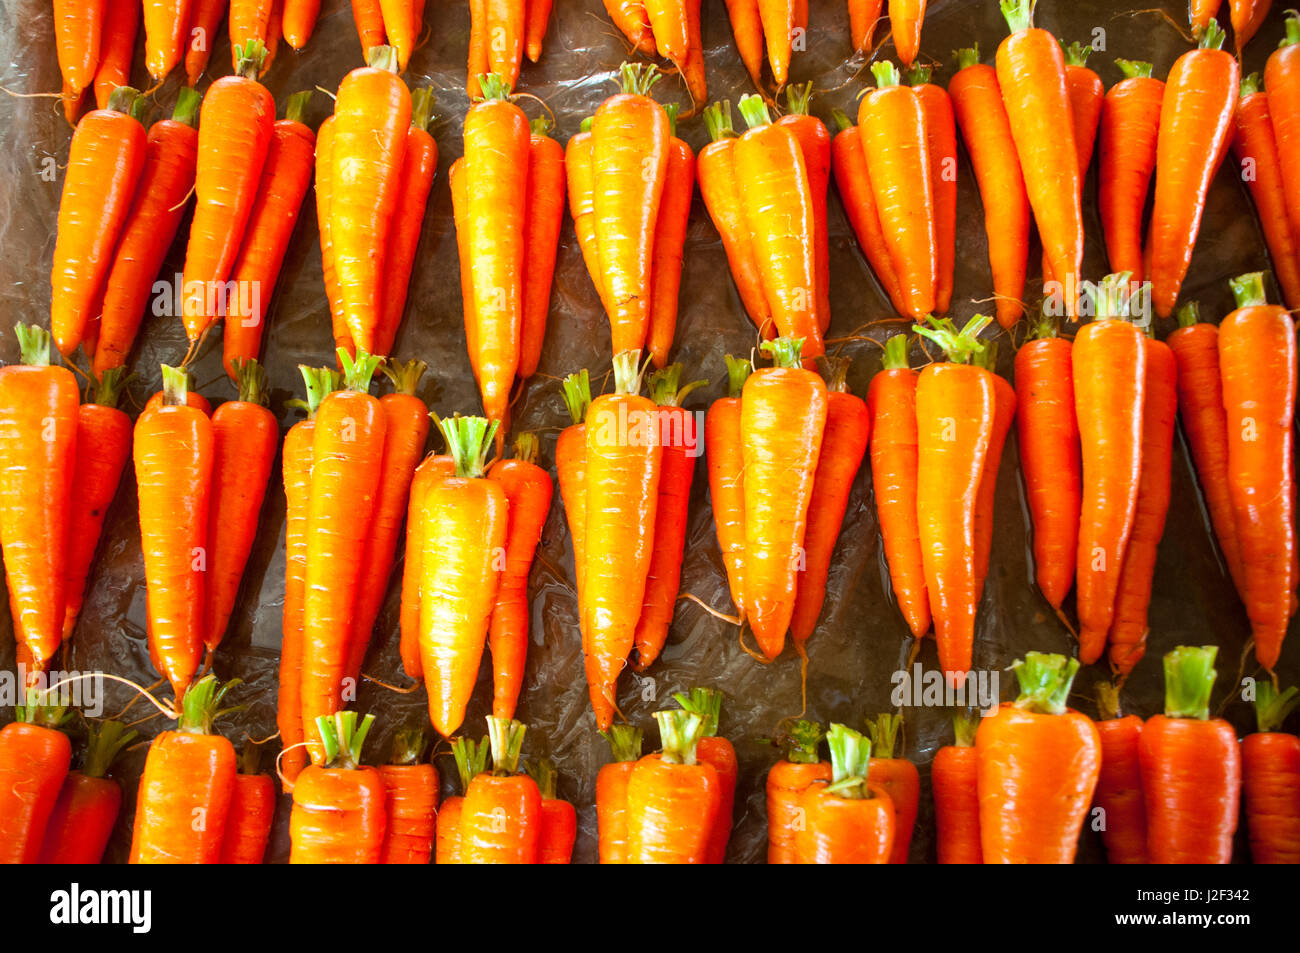 Carrots at the market of Mount Hagen, Highlands, Papua New Guinea, Pacific Stock Photo